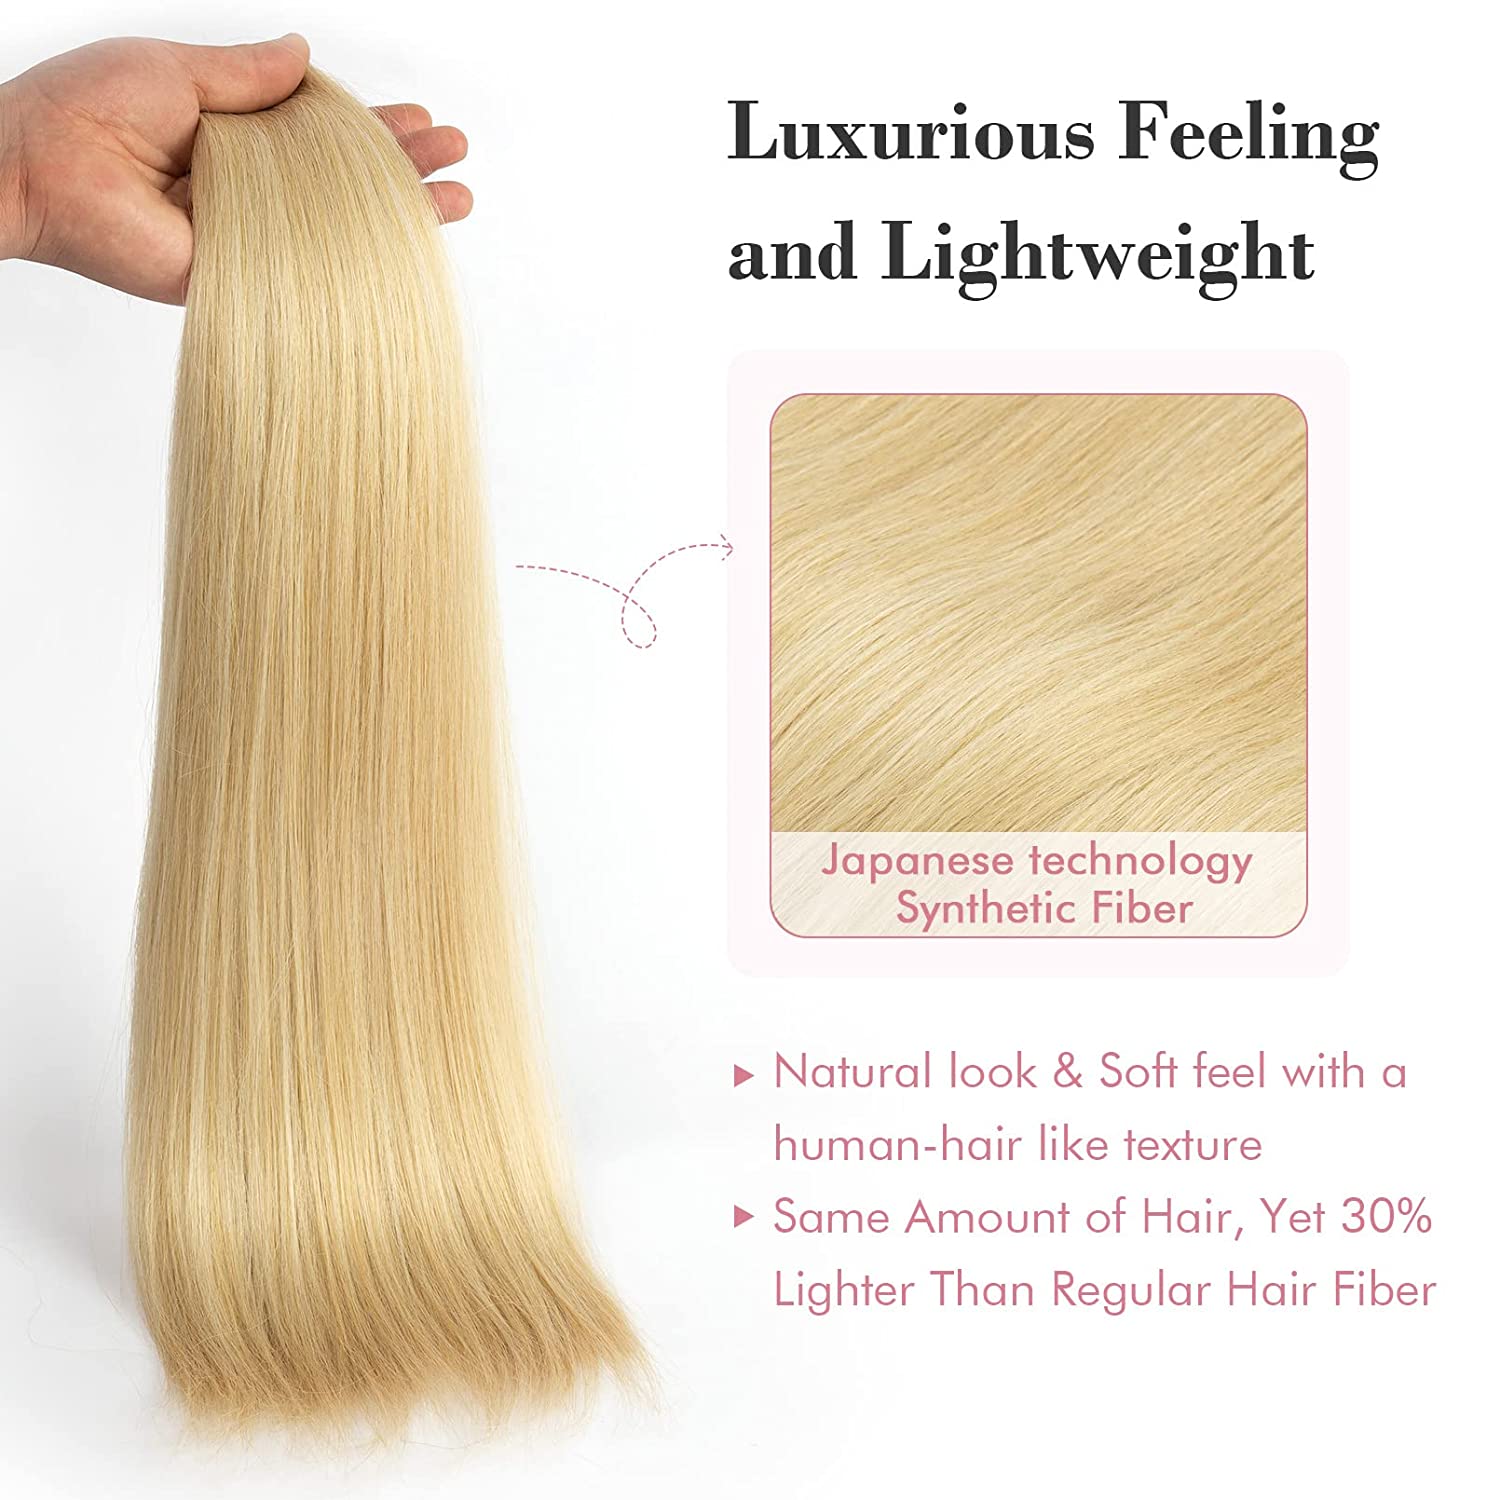 REECHO Clip in Hair Extensions, 24” Hair Extensions 5PCS Thick Long Straight Lace Weft Lightweight Synthetic Hairpieces for Women